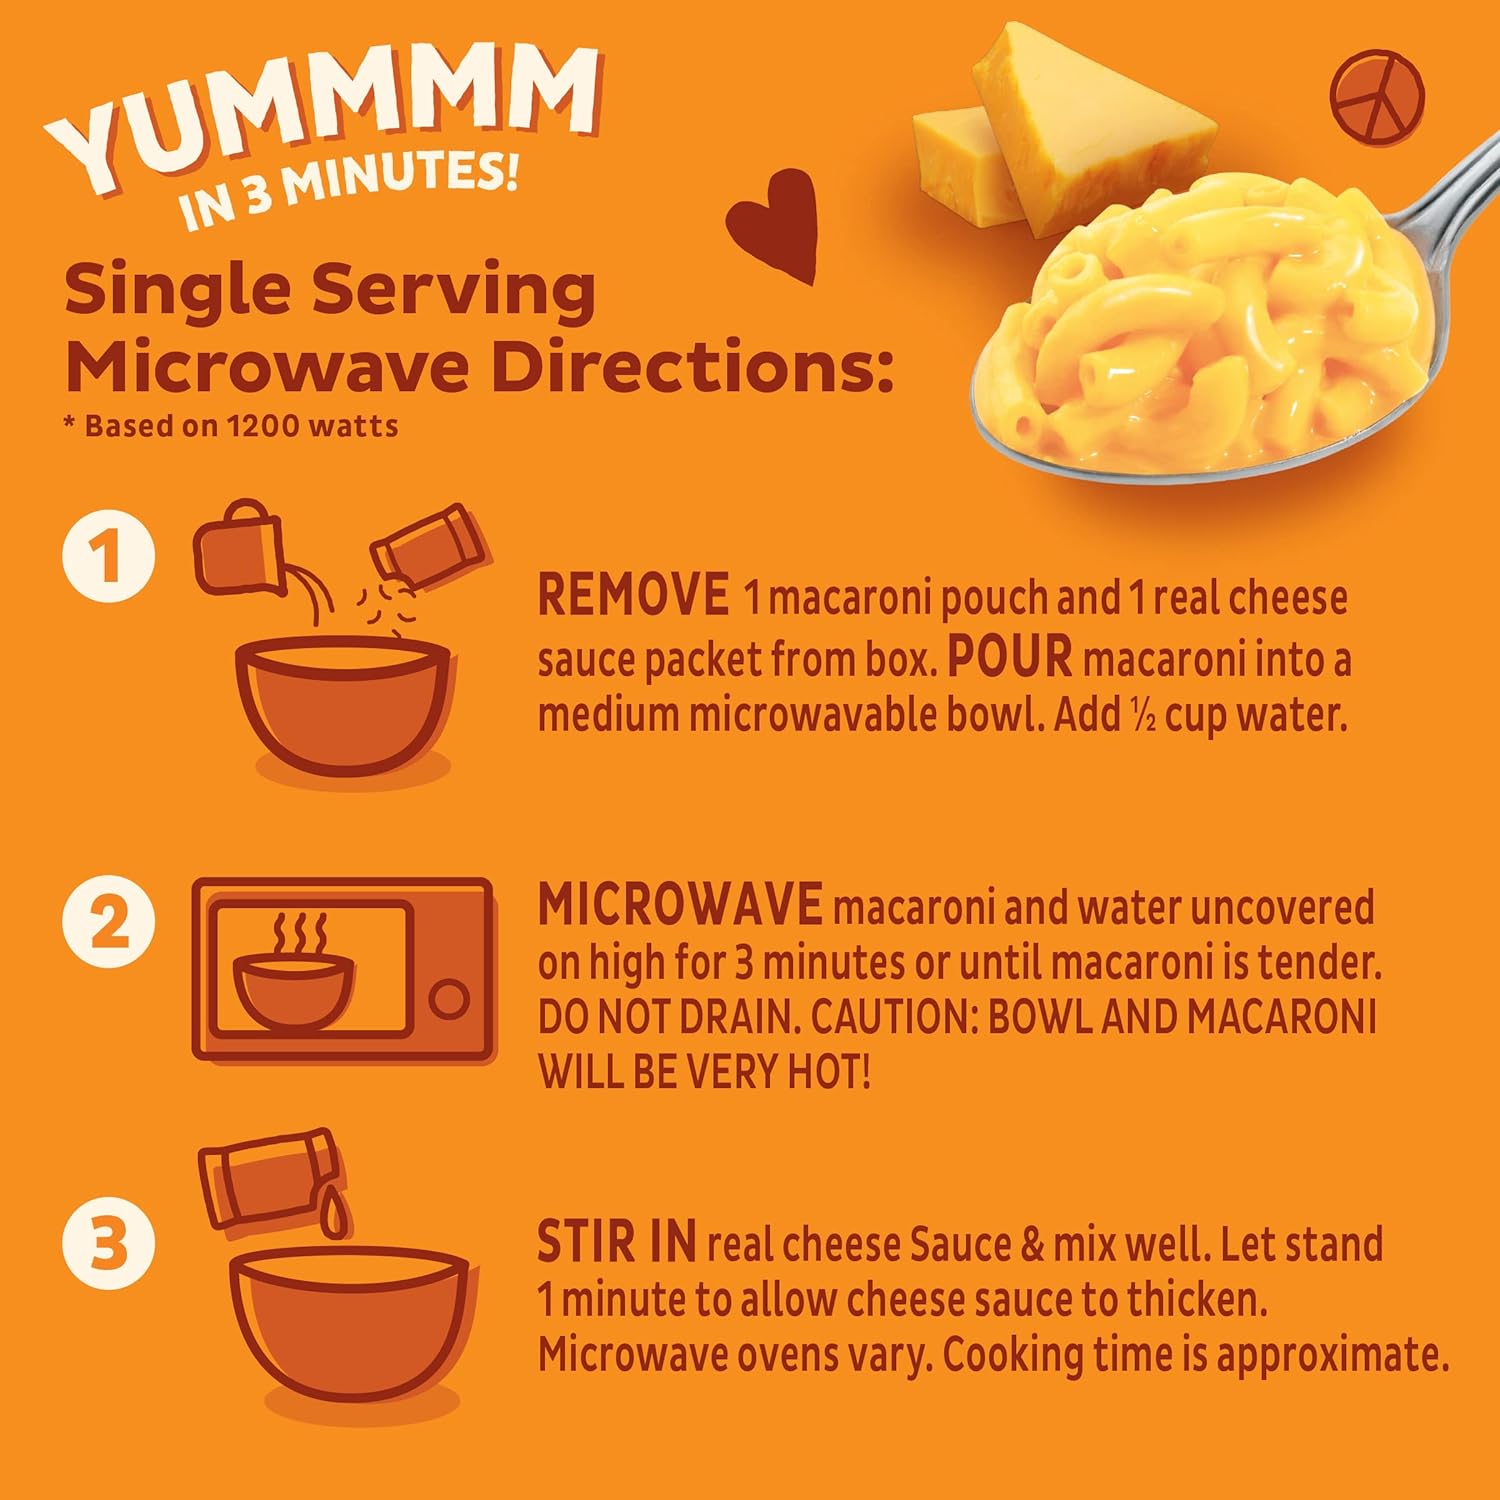 Annie’s Real Aged Cheddar Microwave Mac & Cheese with Organic Pasta, 5